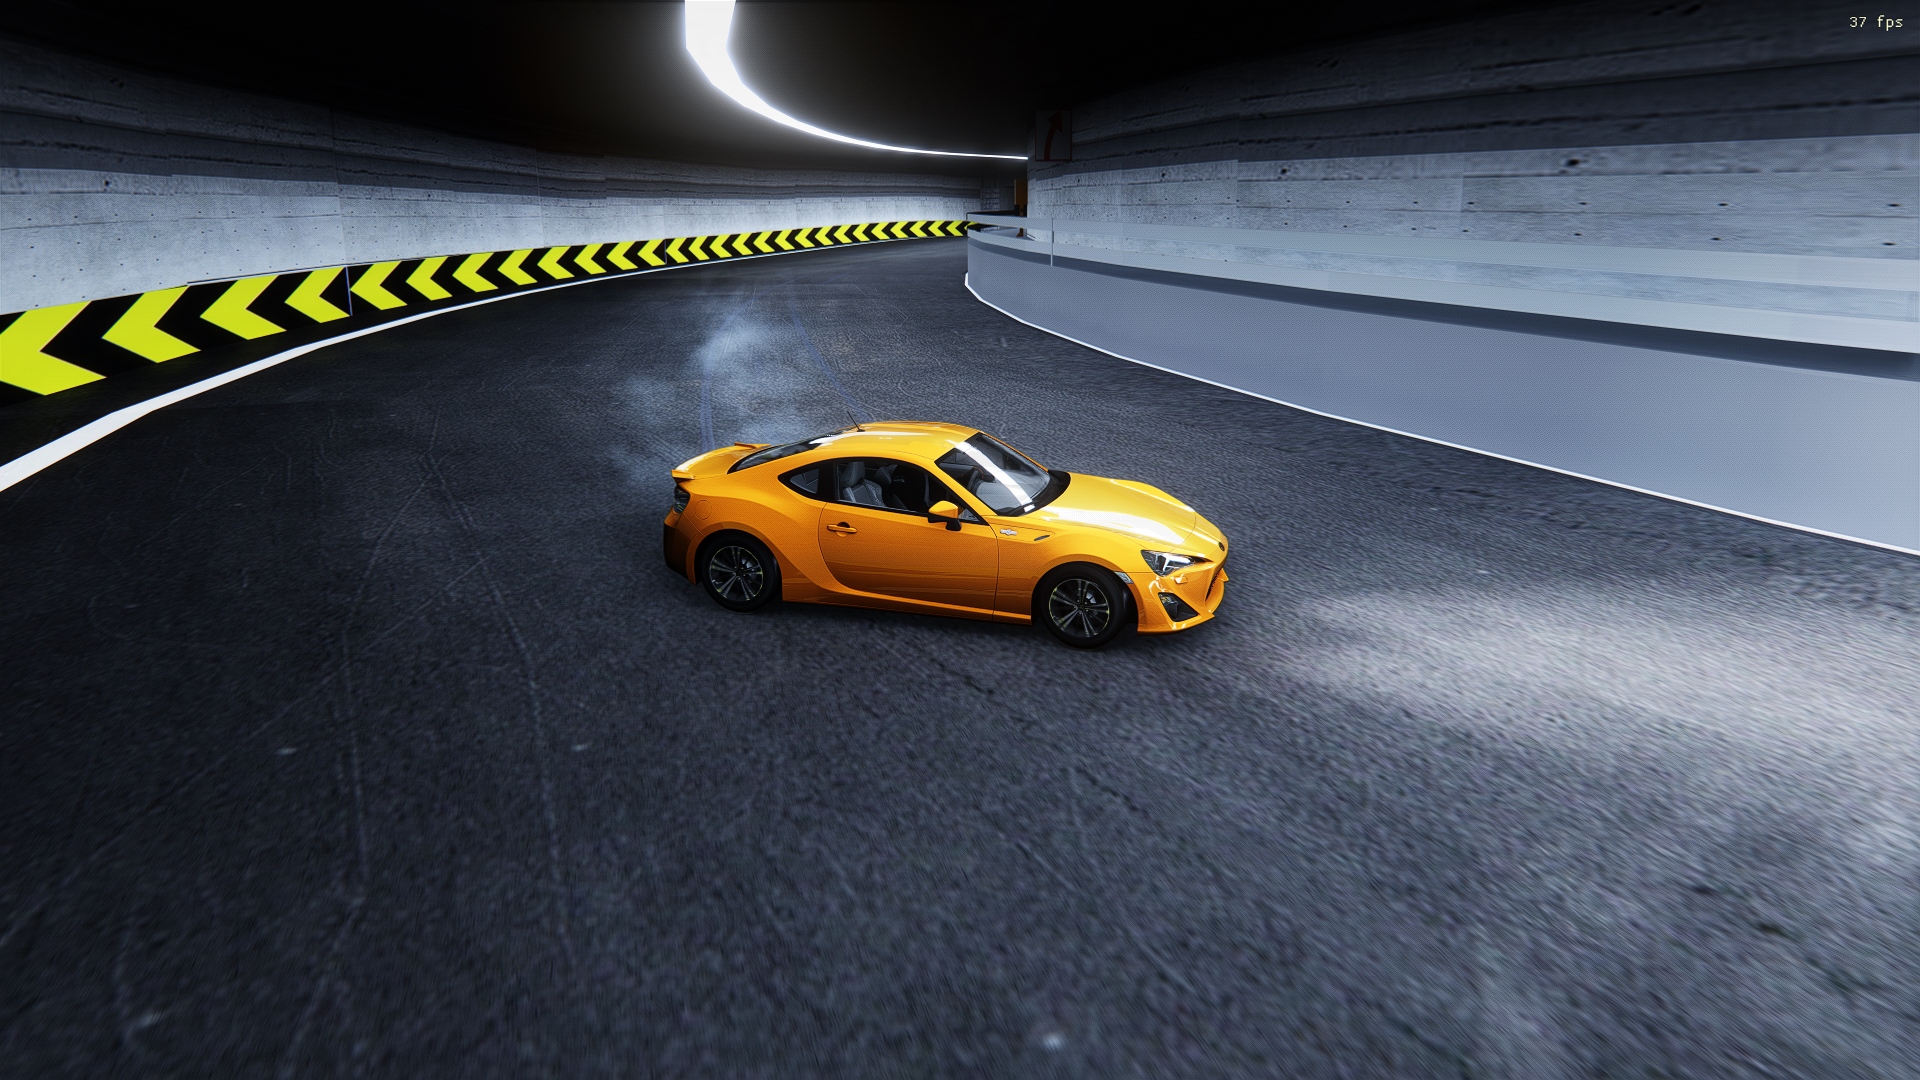 Screenshot_ks_toyota_gt86_special stage route 5_17-7-120-3-12-58.jpg